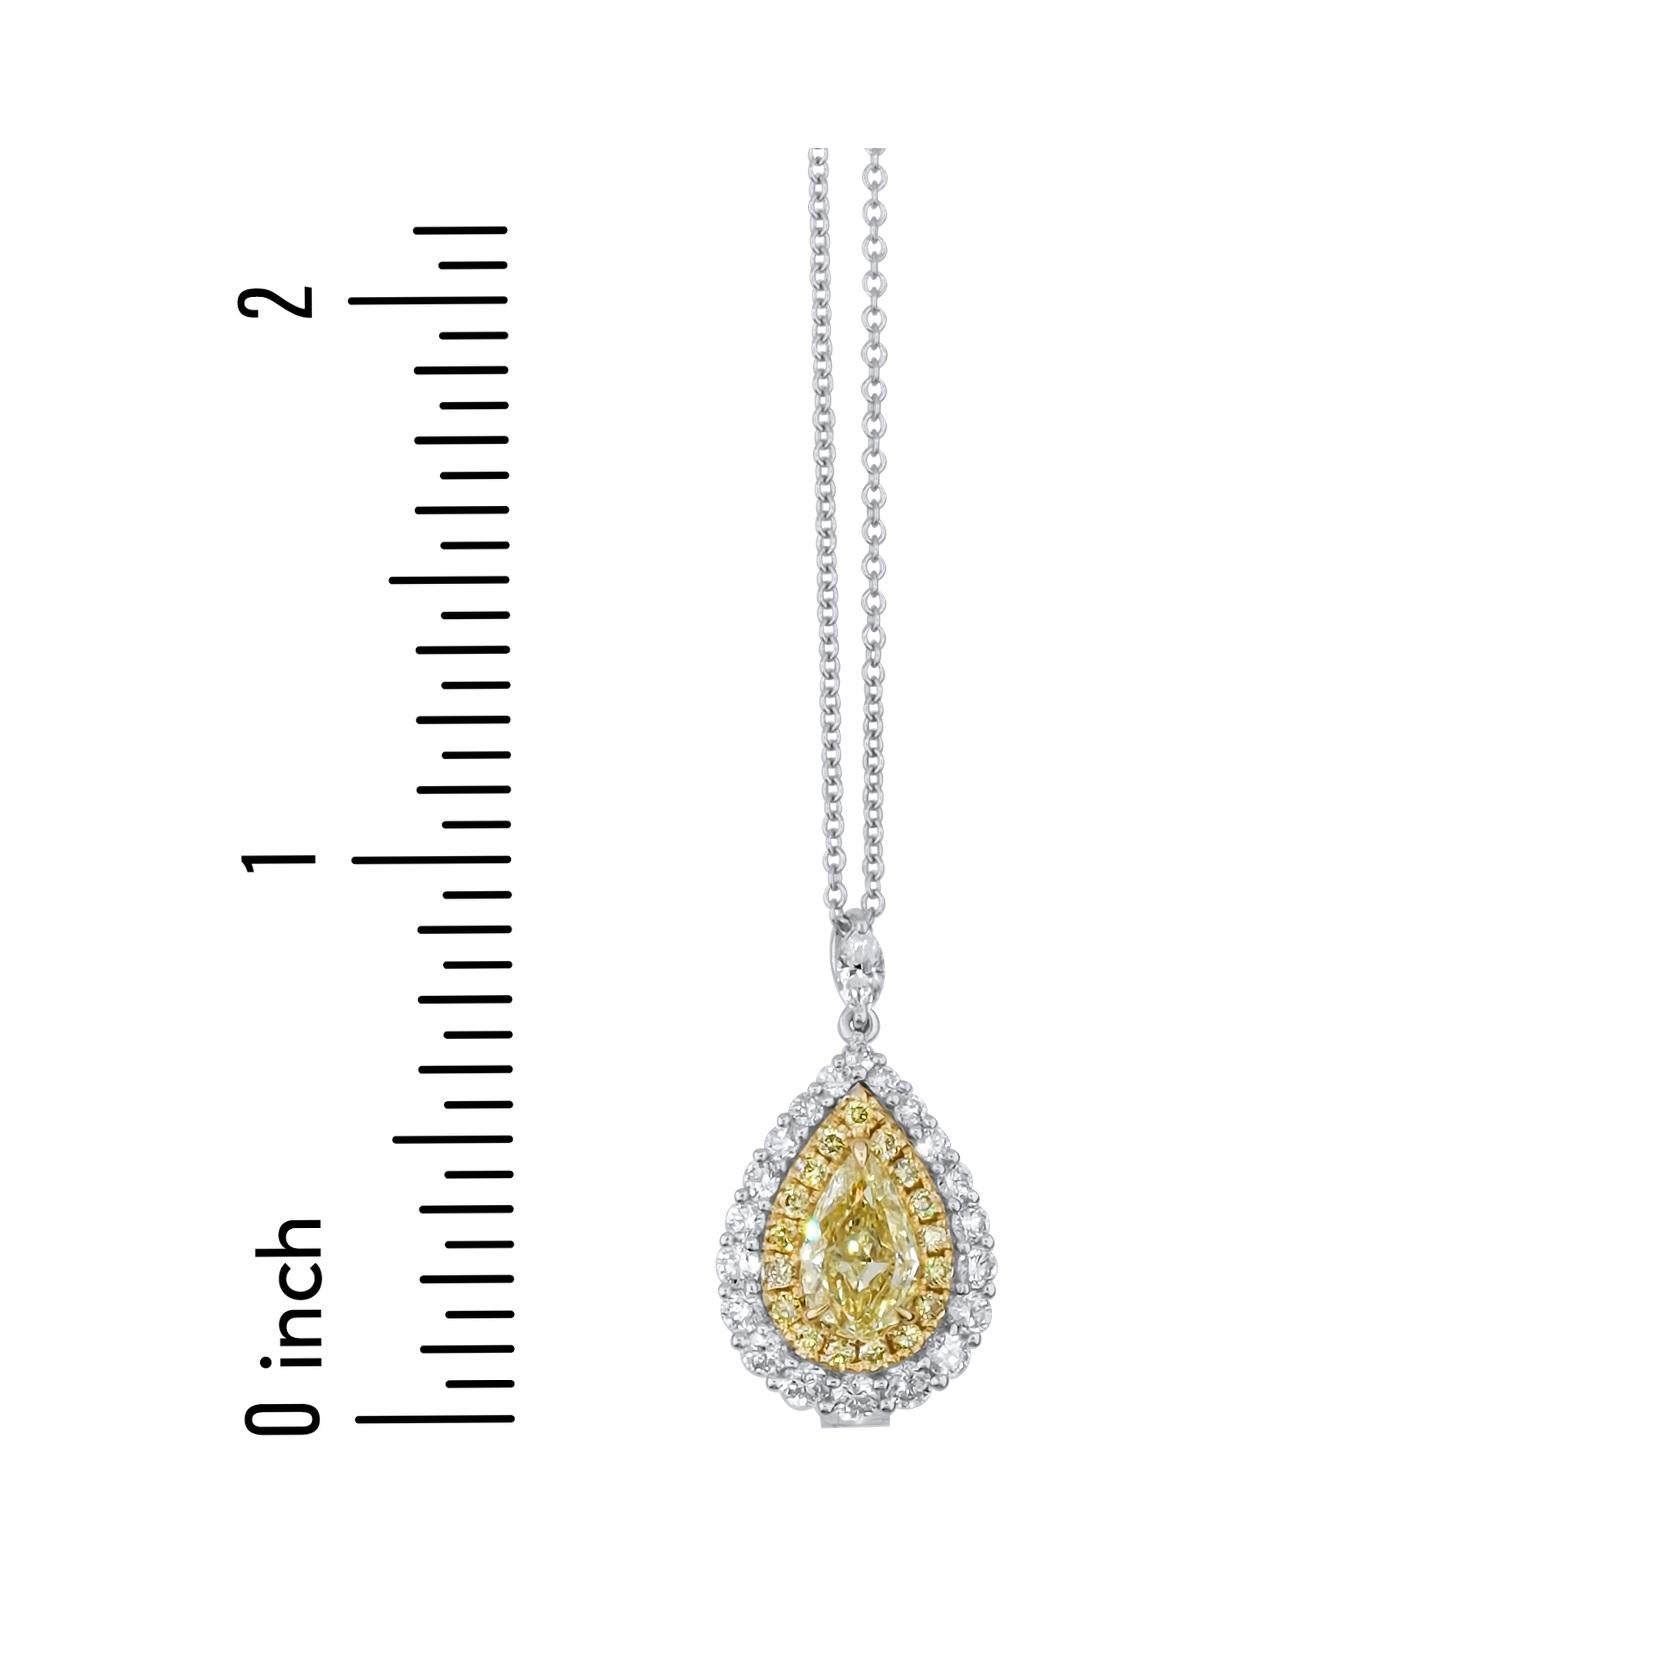 Pear Cut 1.41 Carat Total Weight Yellow Pear and Diamond Halo Pendant in 18k Gold ref2046 For Sale